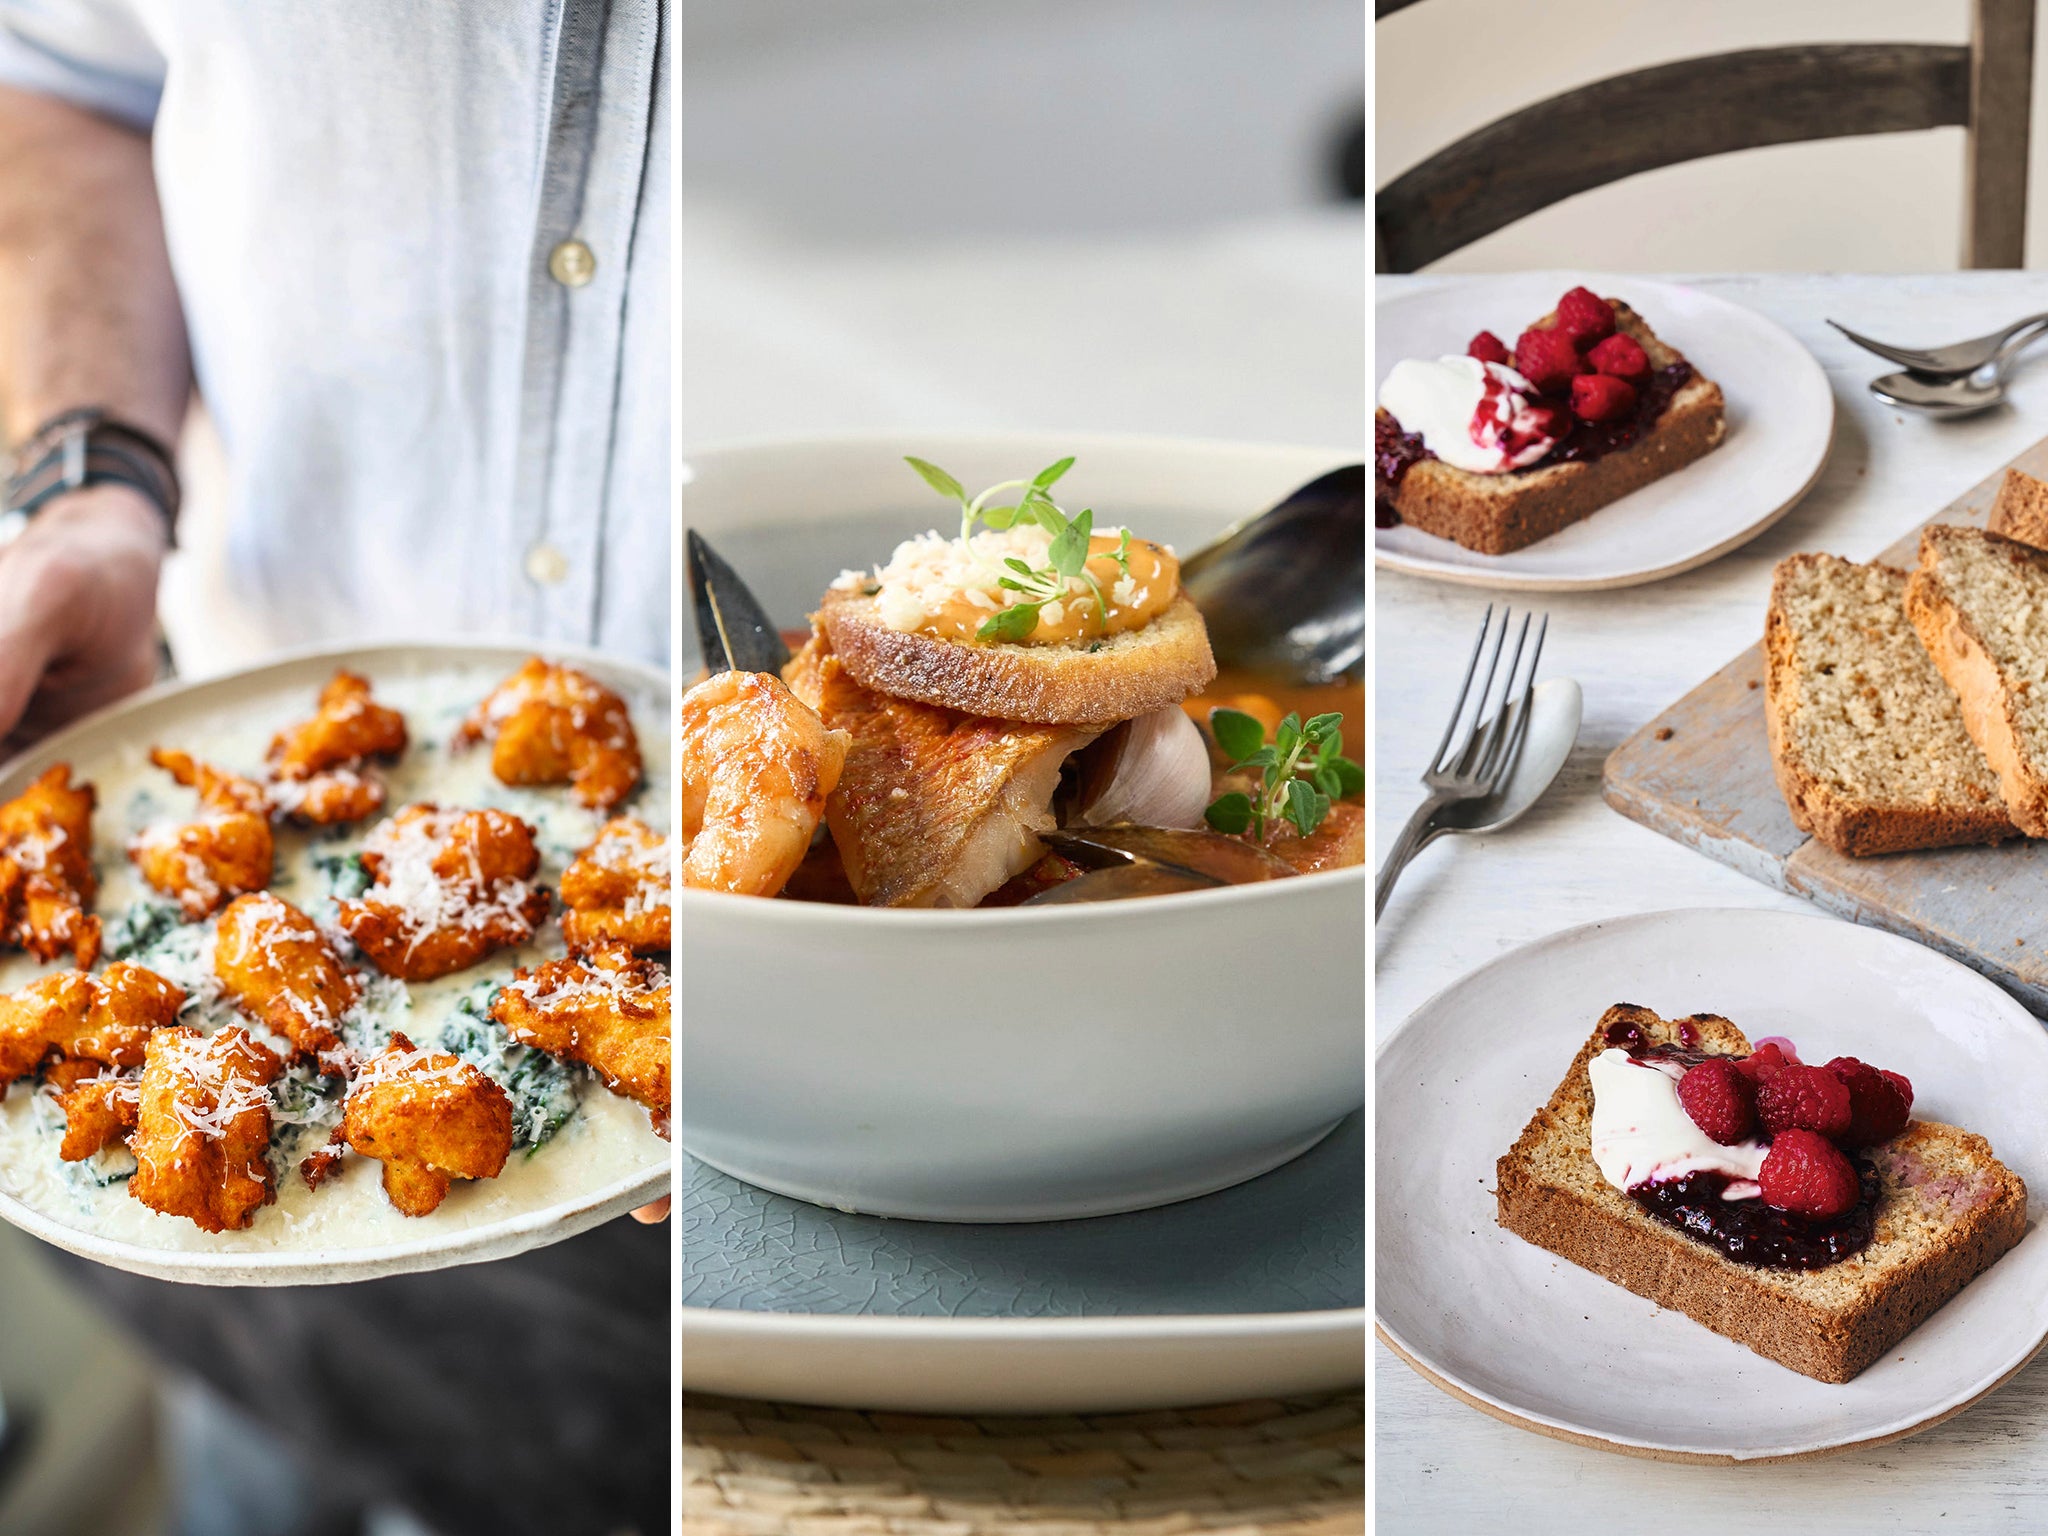 Parmesan fritters, fish soup and coconut bread with raspberry cream are some of the dishes on the menu at home